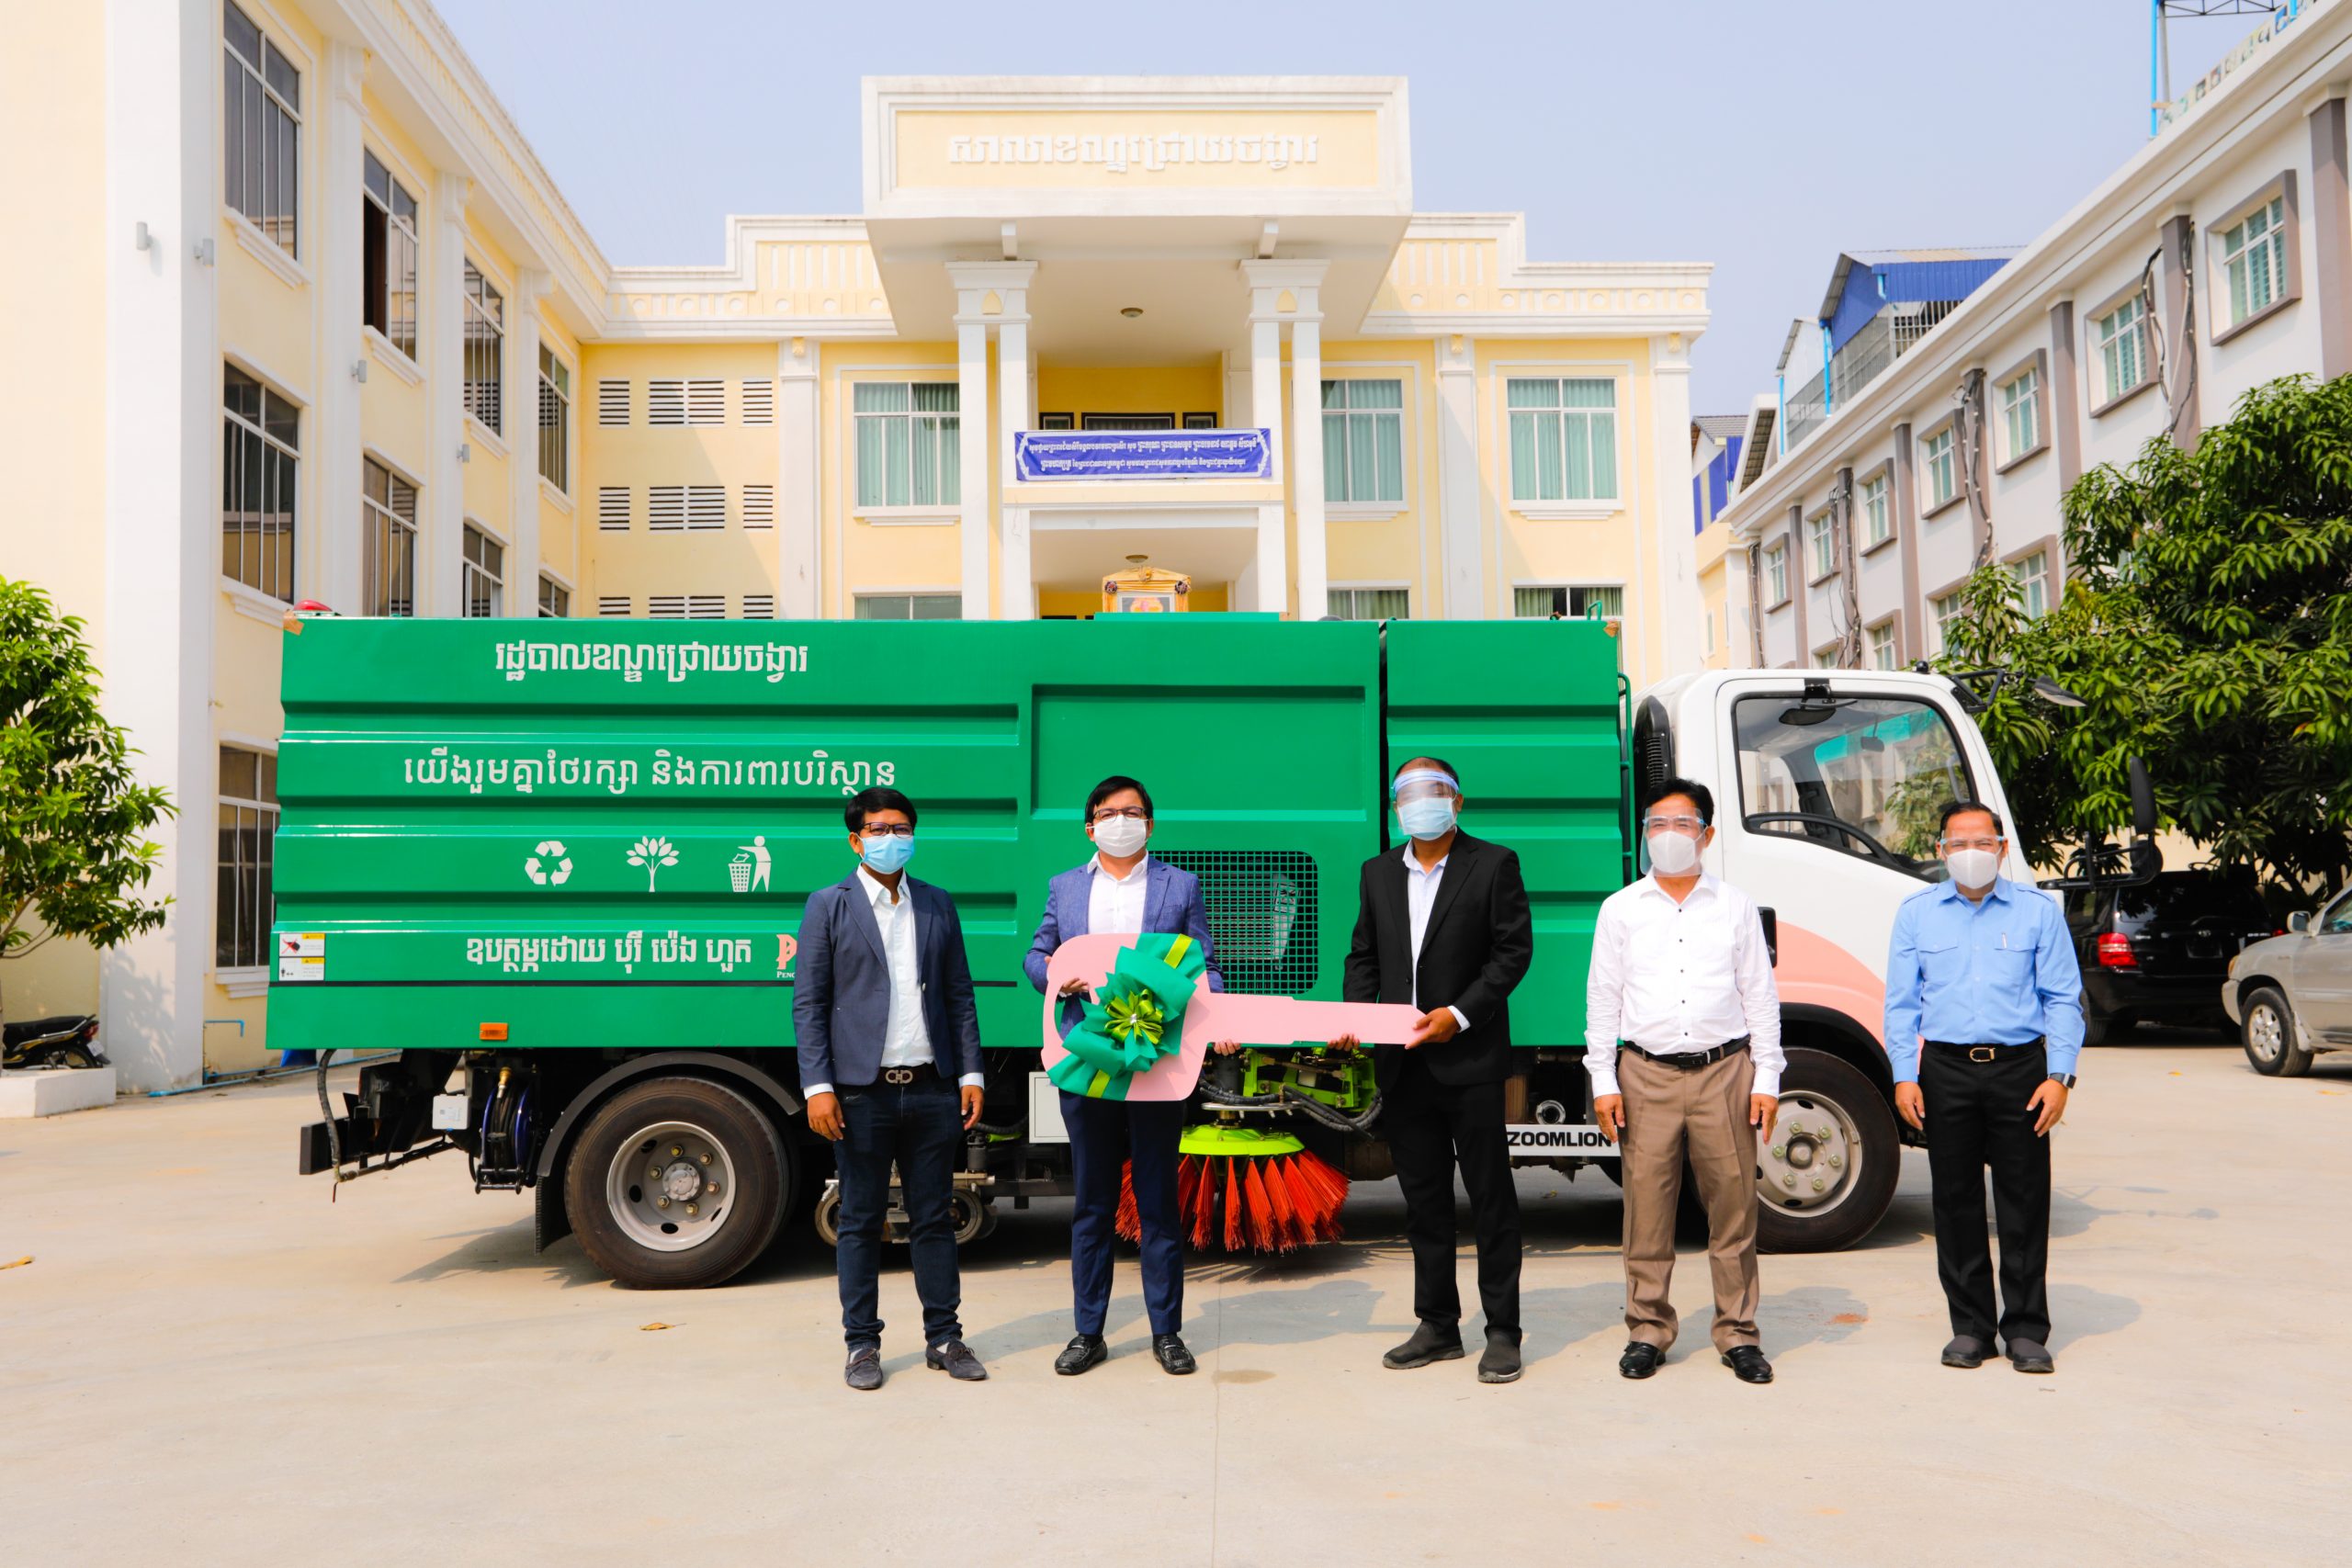 Peng Huoth Group Donates a Sweeper truck to Chroy Changvar District Administration to Clean Environment and City